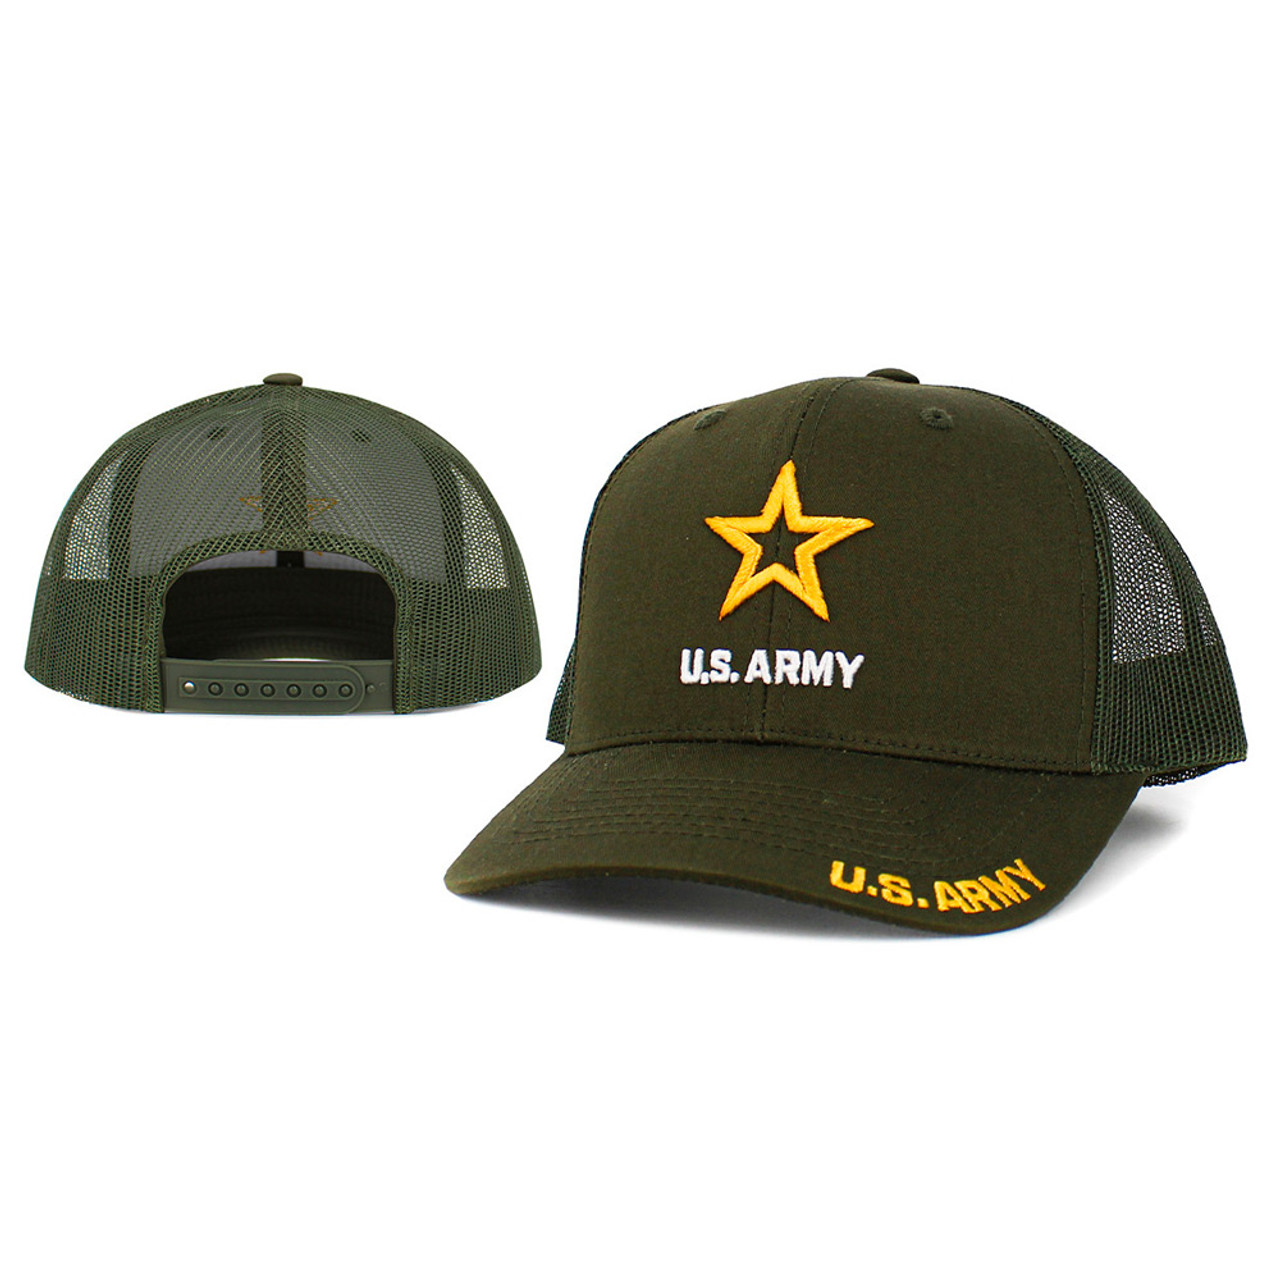 Officially Licensed U.S. Army Hat